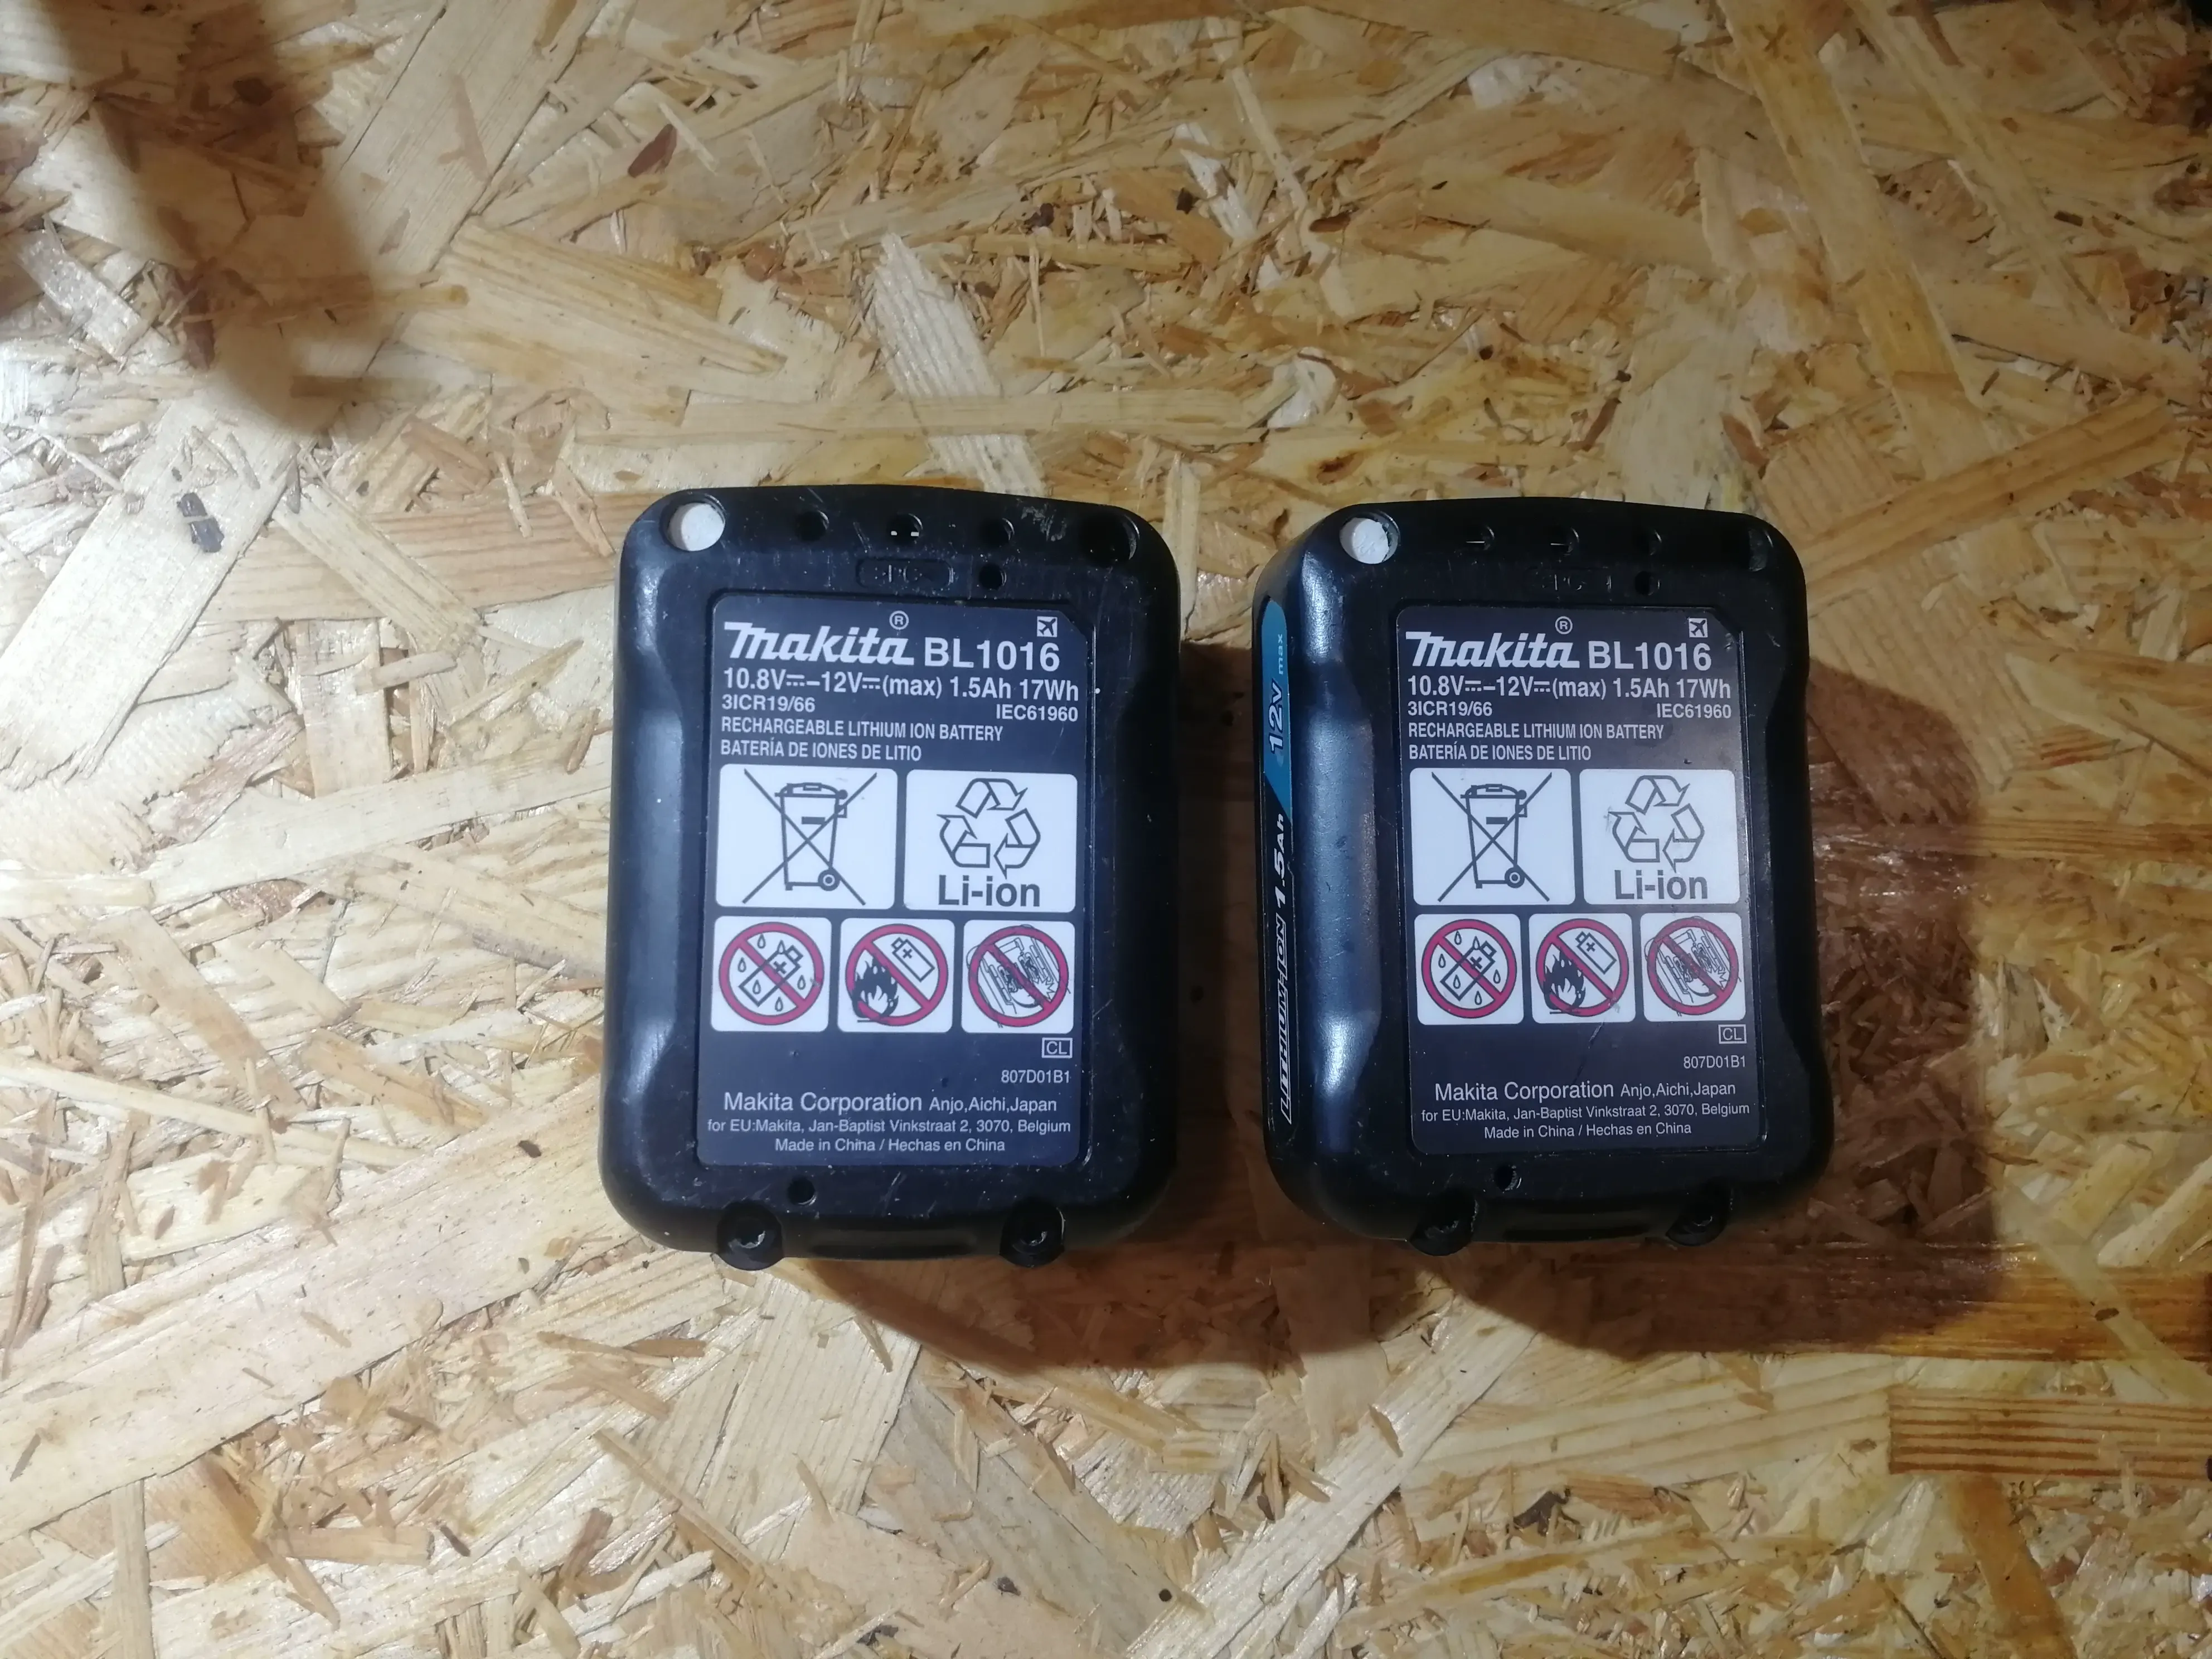 bosch and makita battery wall mount holders